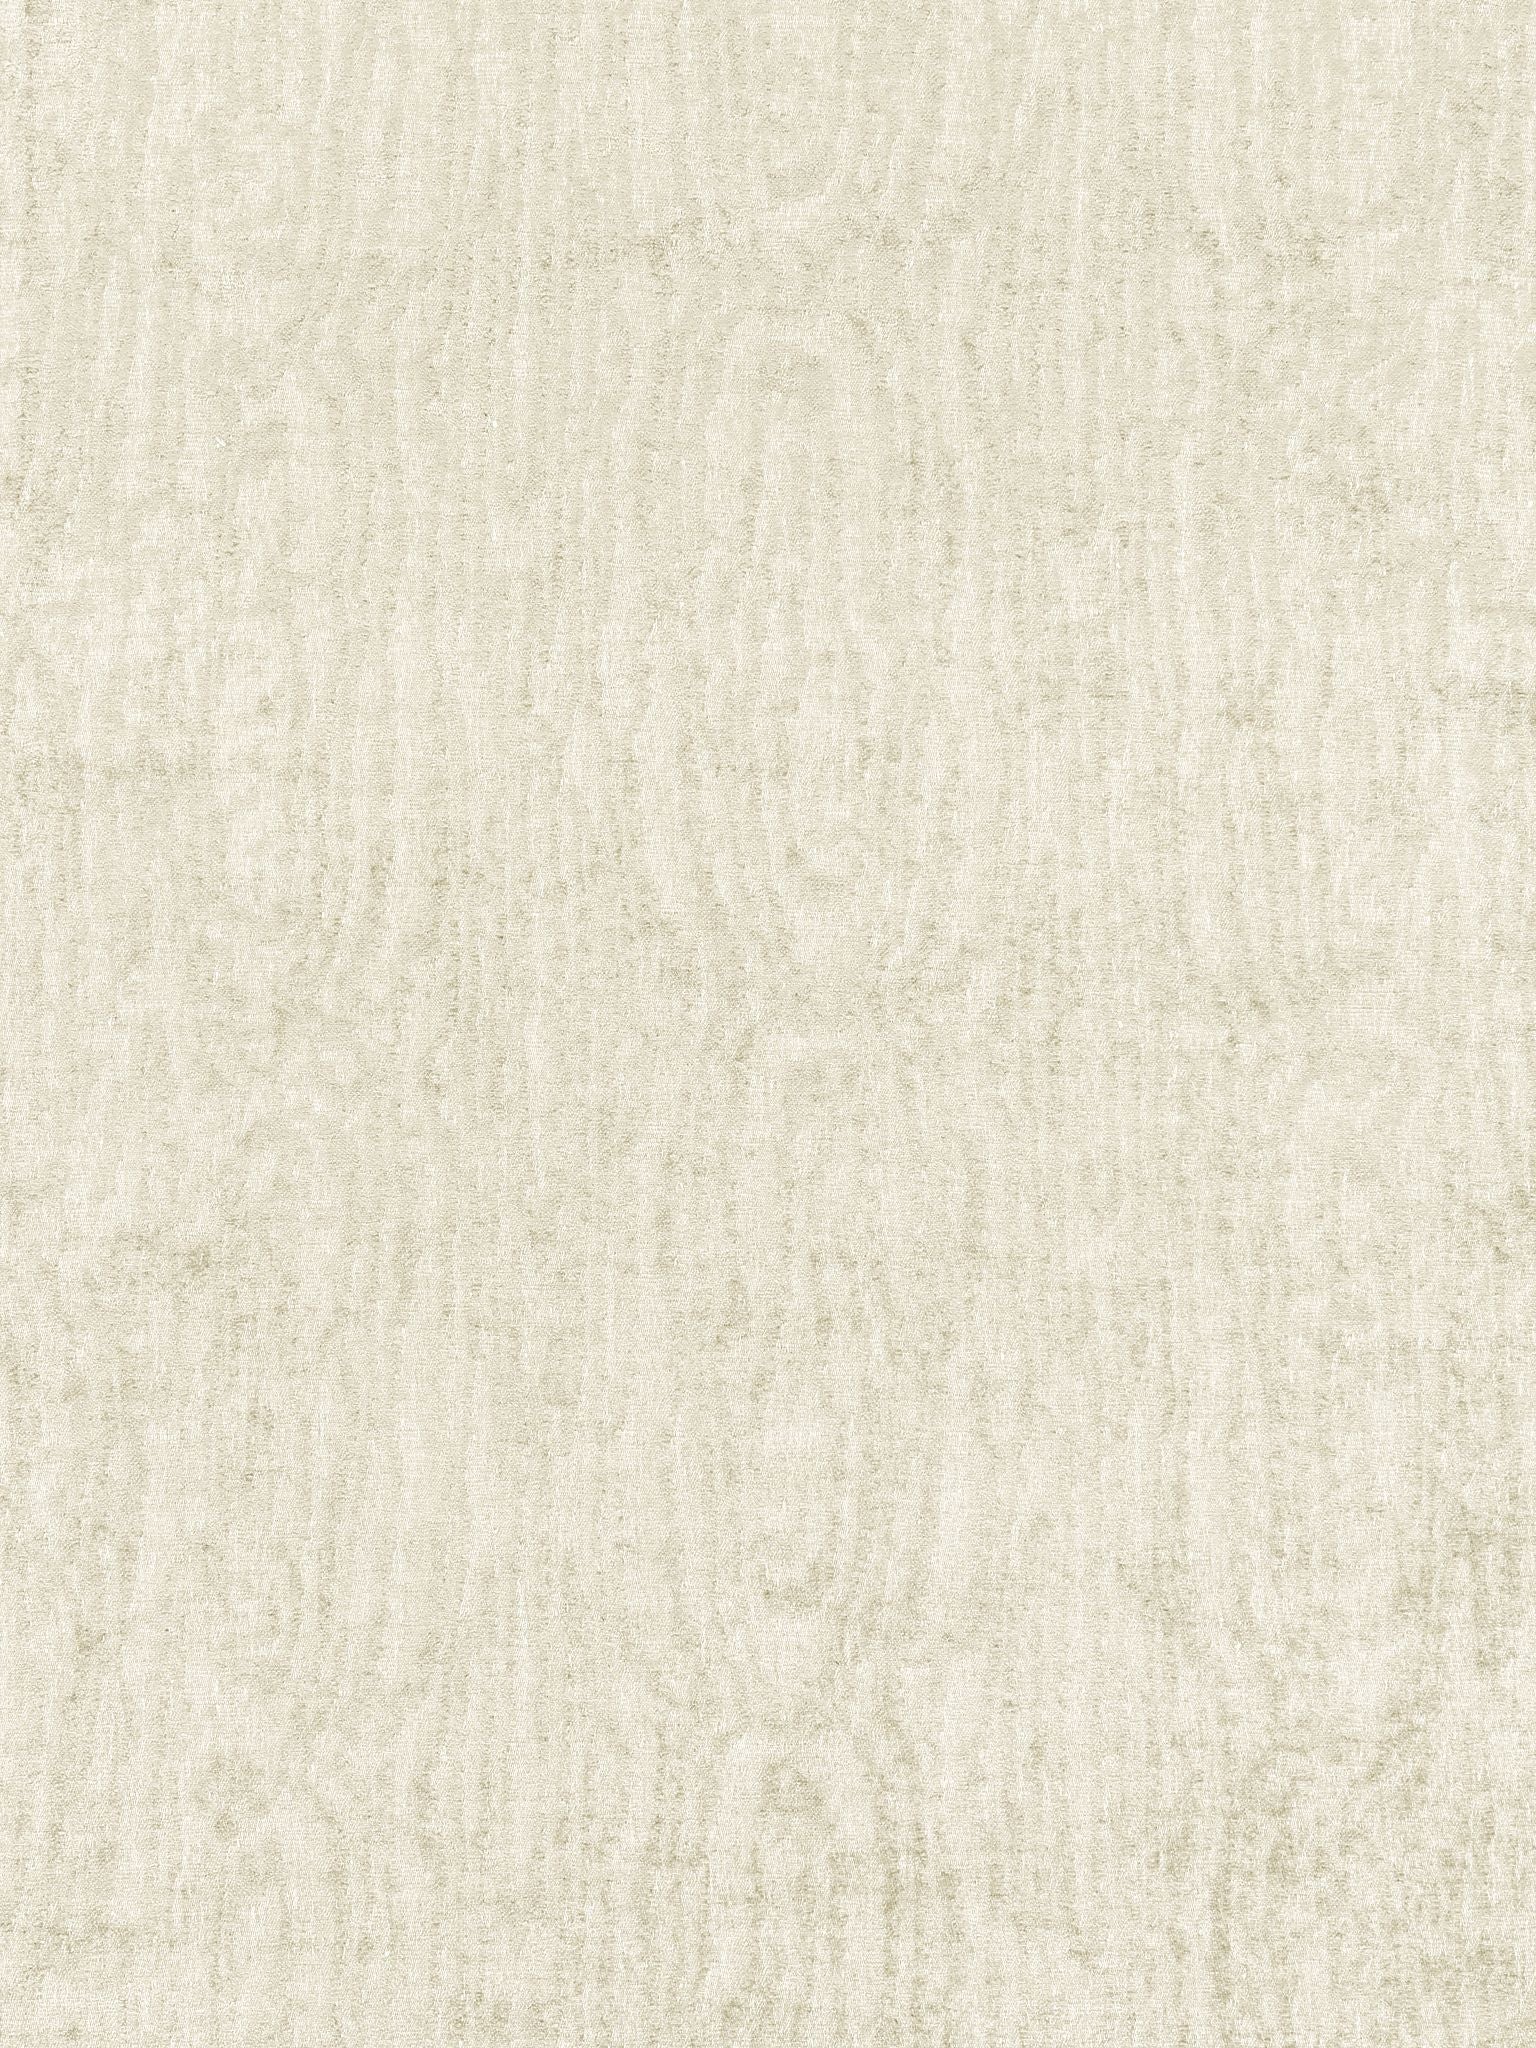 Whitby fabric in winter white color - pattern number N3 00025102 - by Scalamandre in the Old World Weavers collection